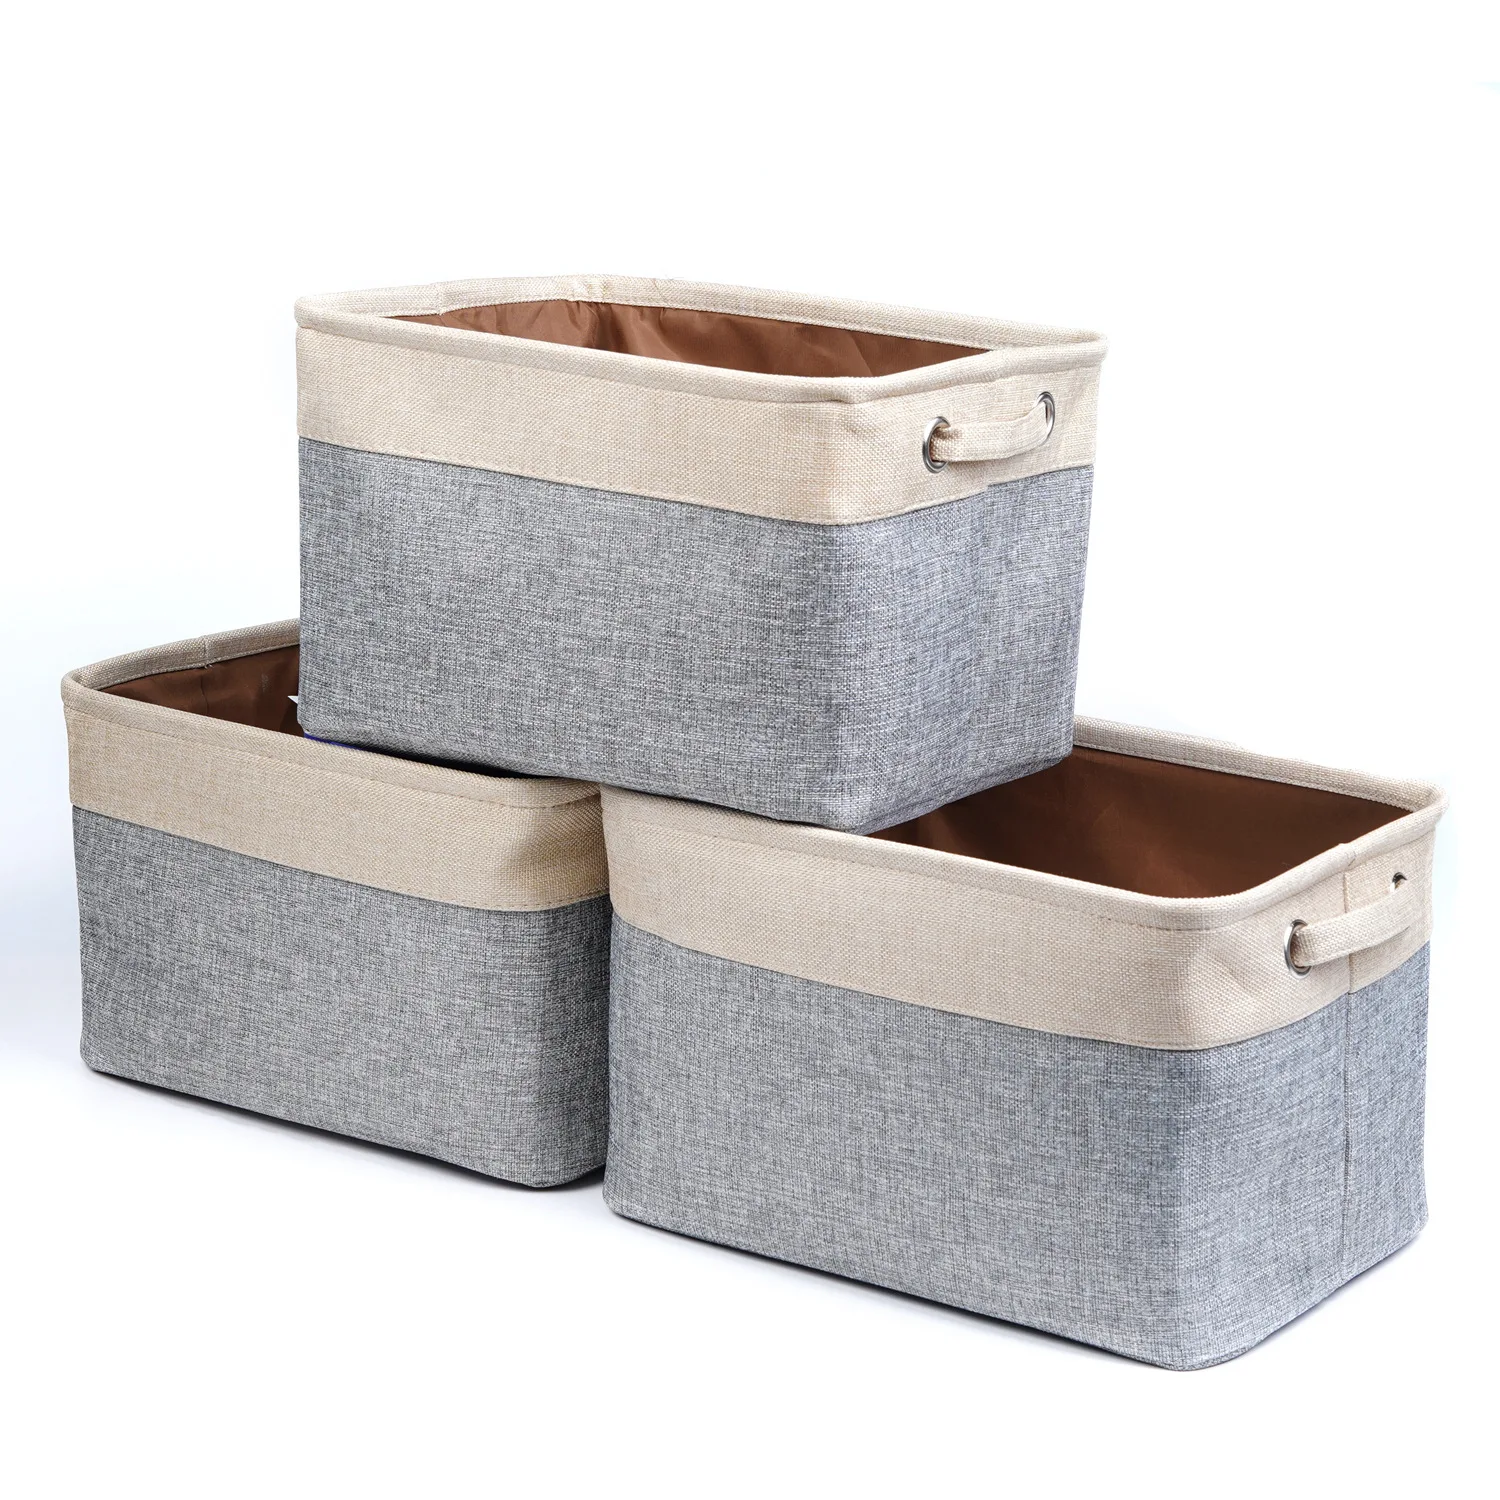 

3 Pack Storage Baskets with Cotton Handles Collapsible Linen Box for Toys Clothes Laundry Organizer Sundries Closet Container